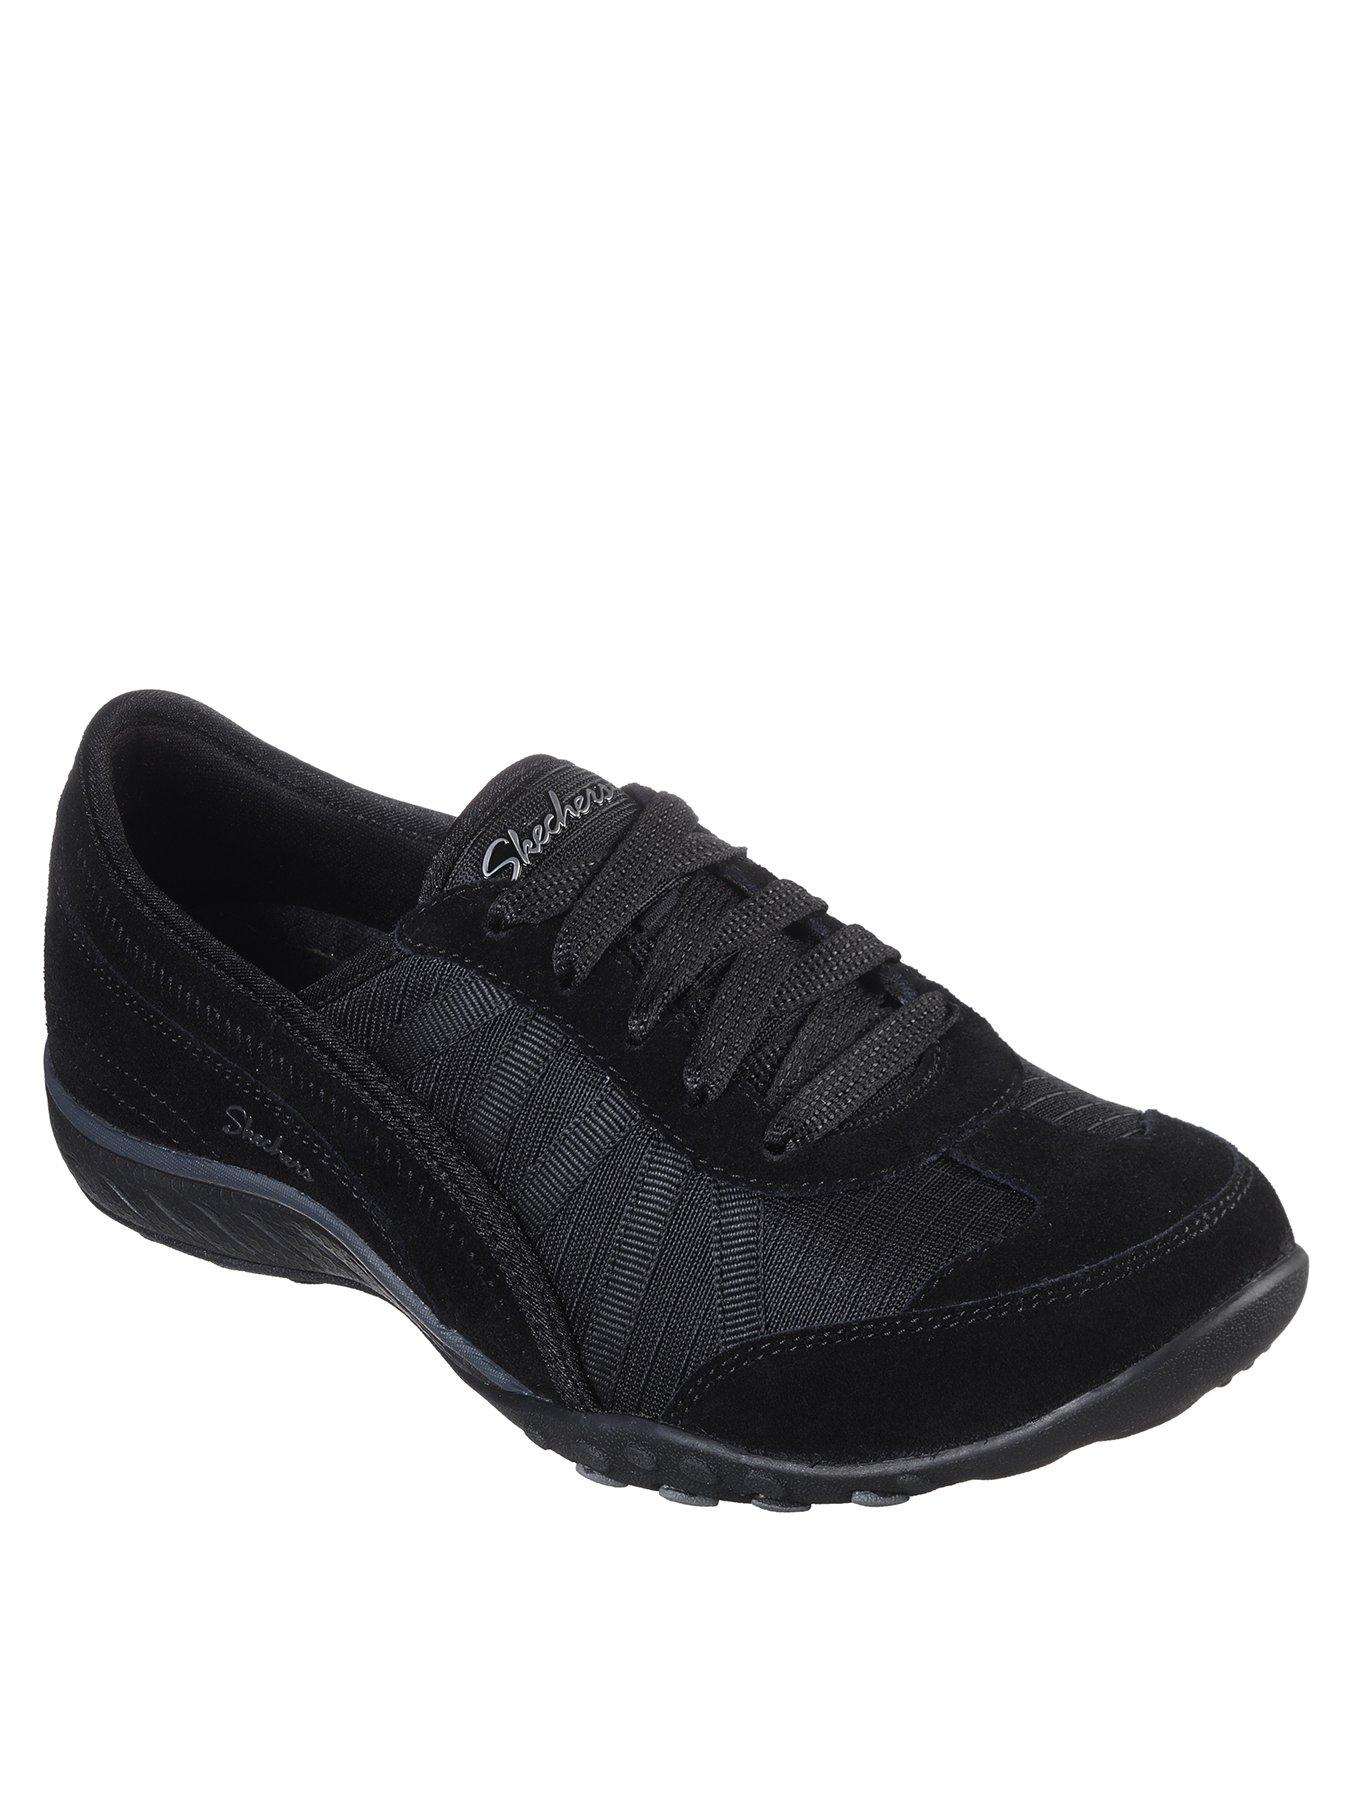 skechers shoes stockists